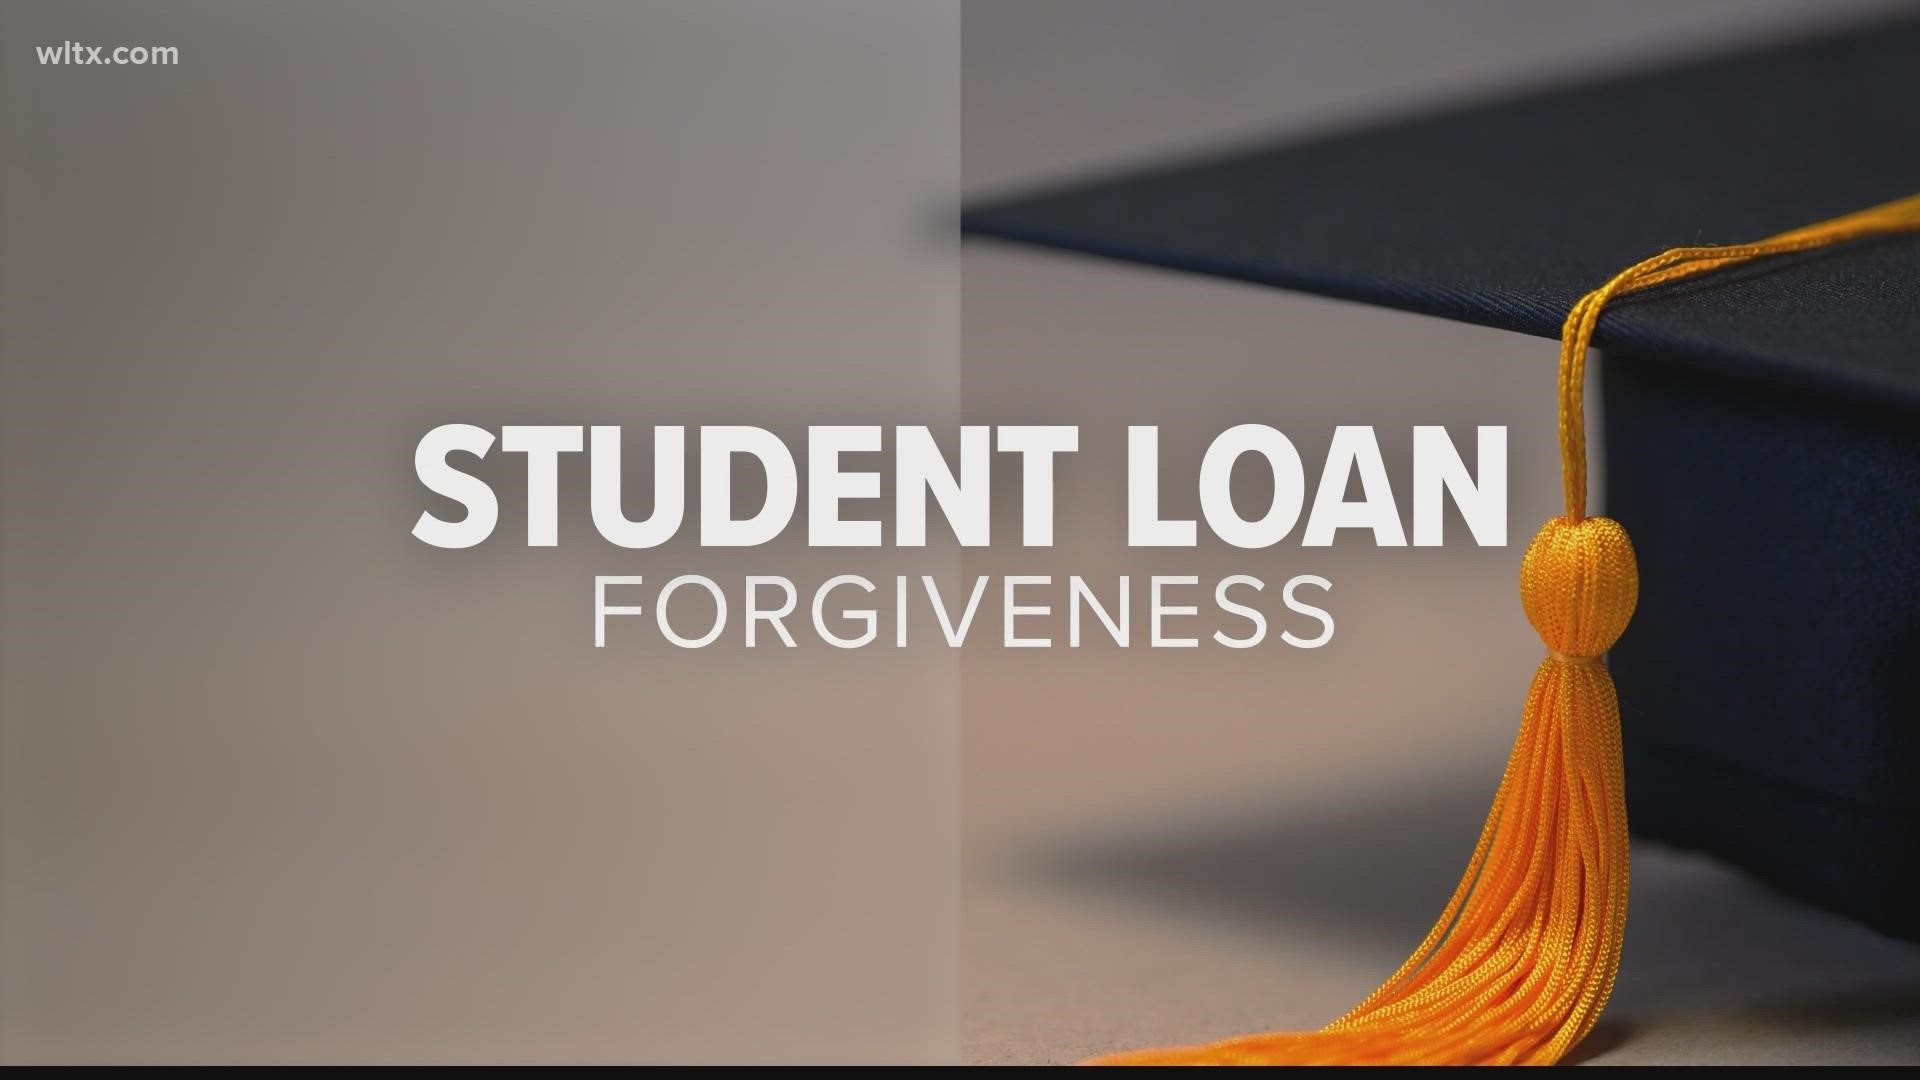 The announcement of forgiveness of possibly up to $10,000 per student is expected to come sometime on Wednesday.